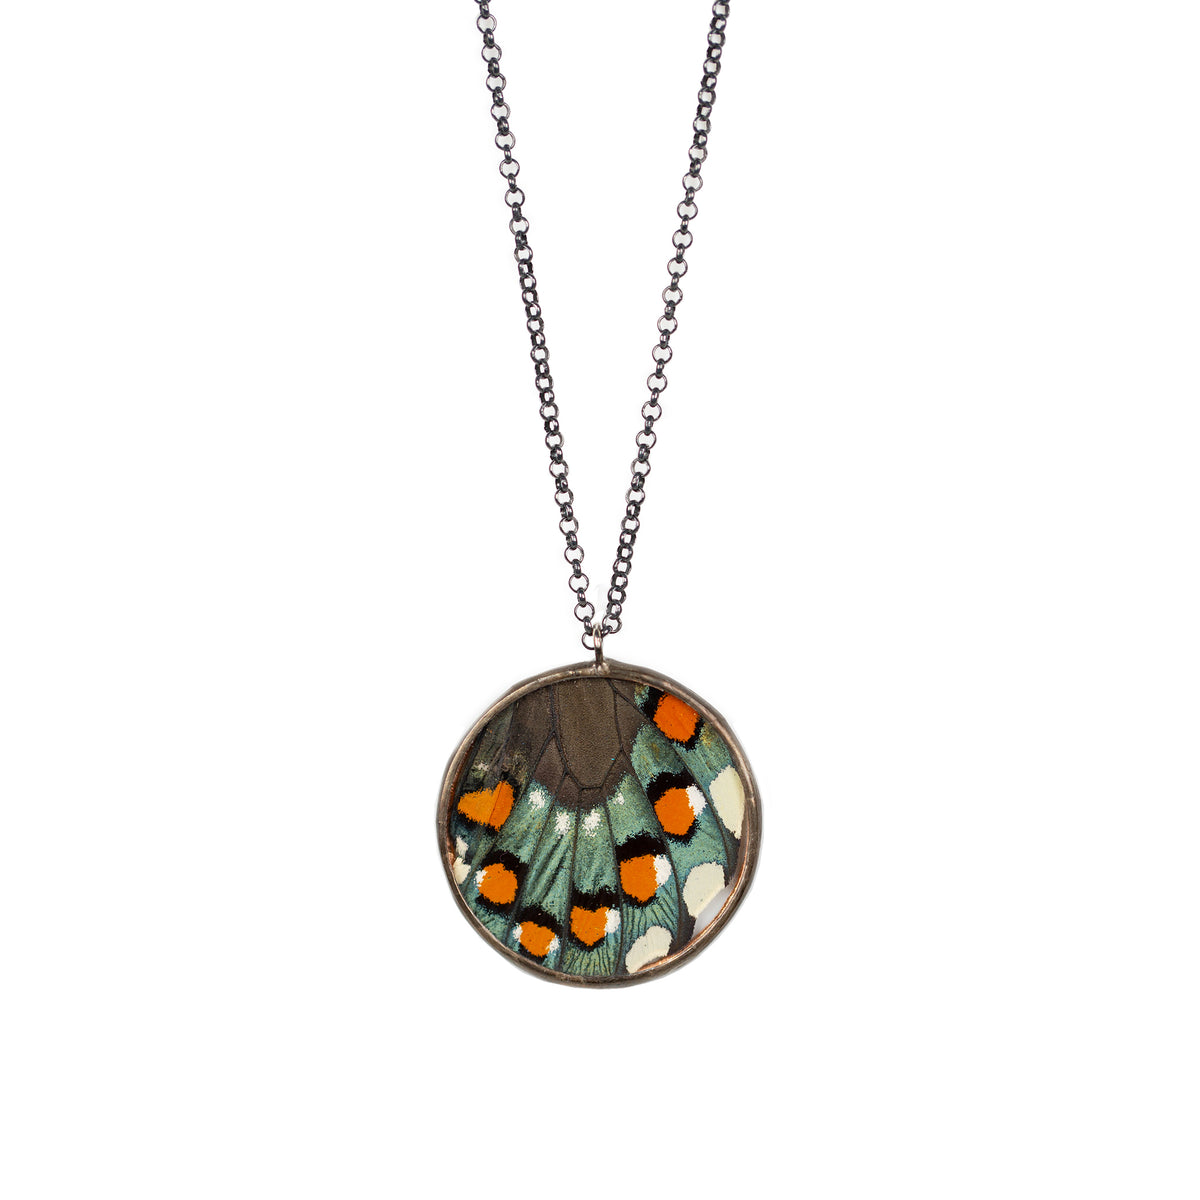 Pipeline Butterfly Rondure Necklace